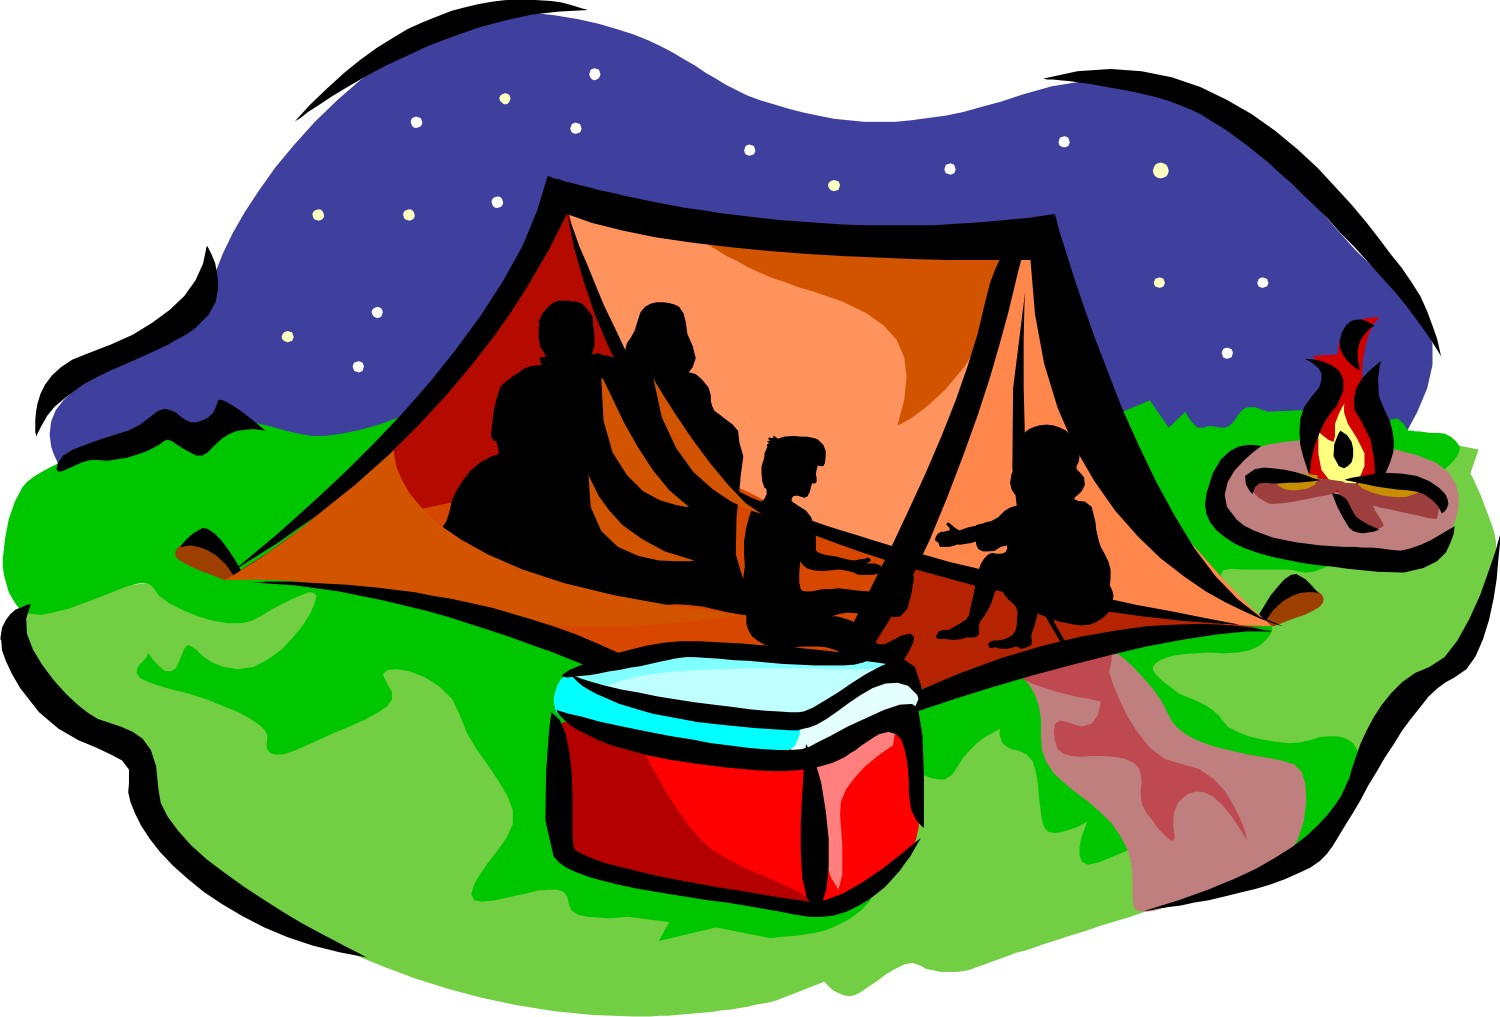 pictures-of-camping-tents-cliparts-co